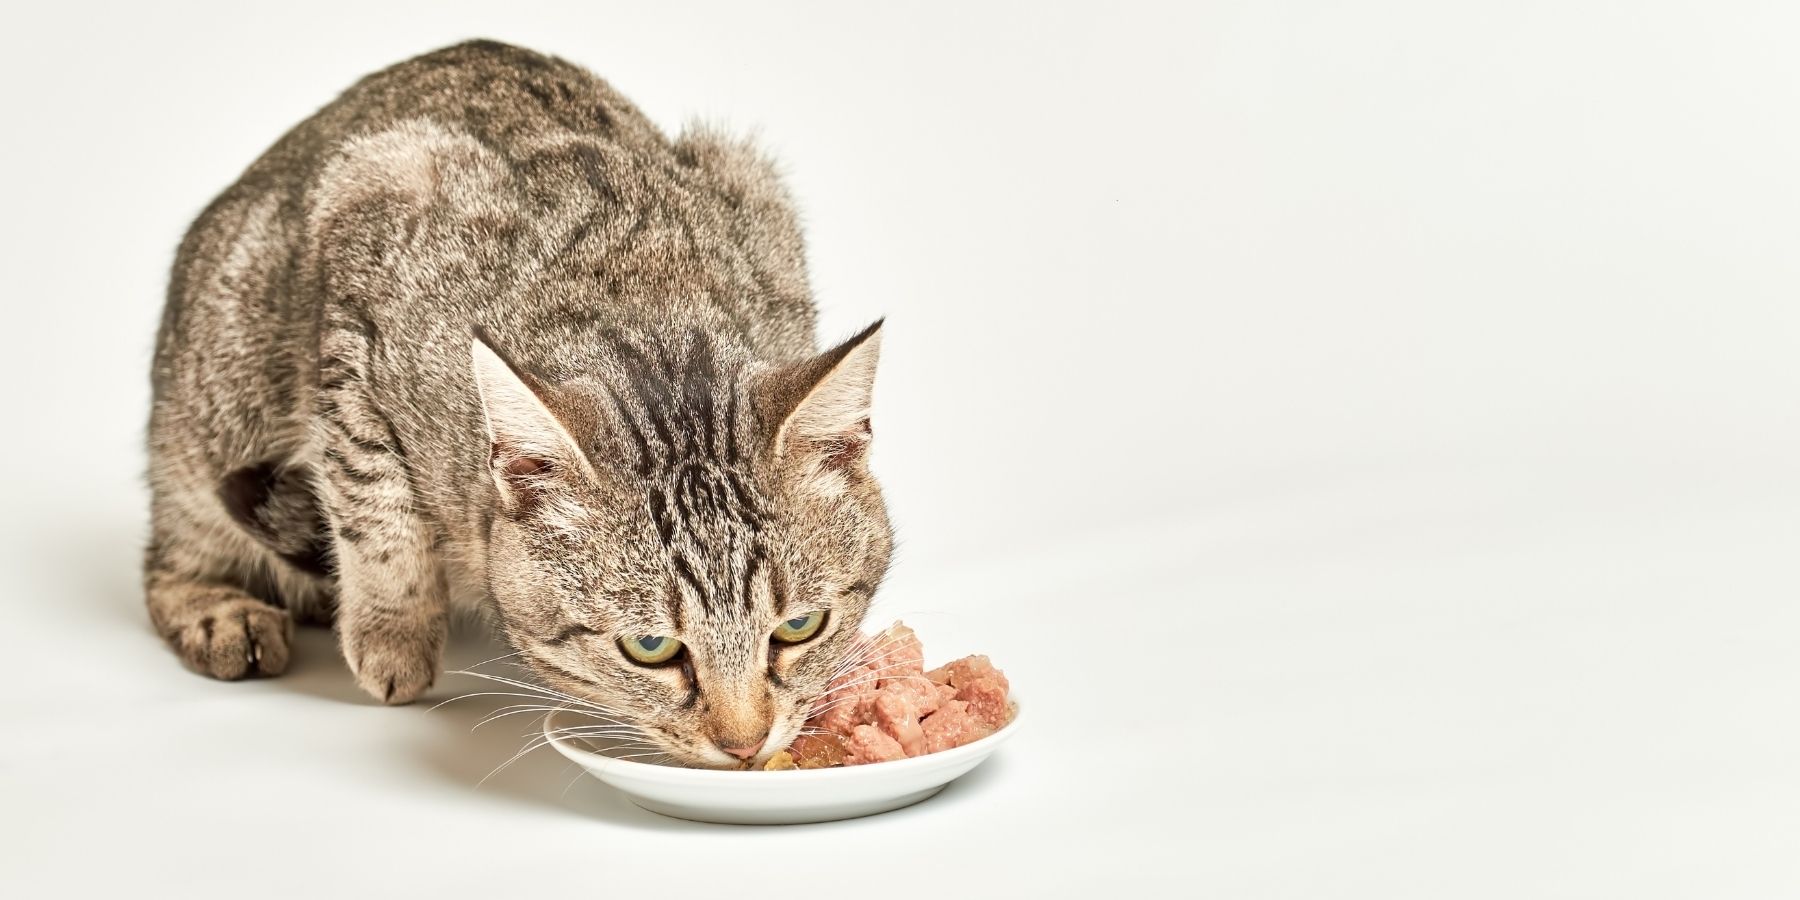 What To Feed My Cat To Gain Weight?